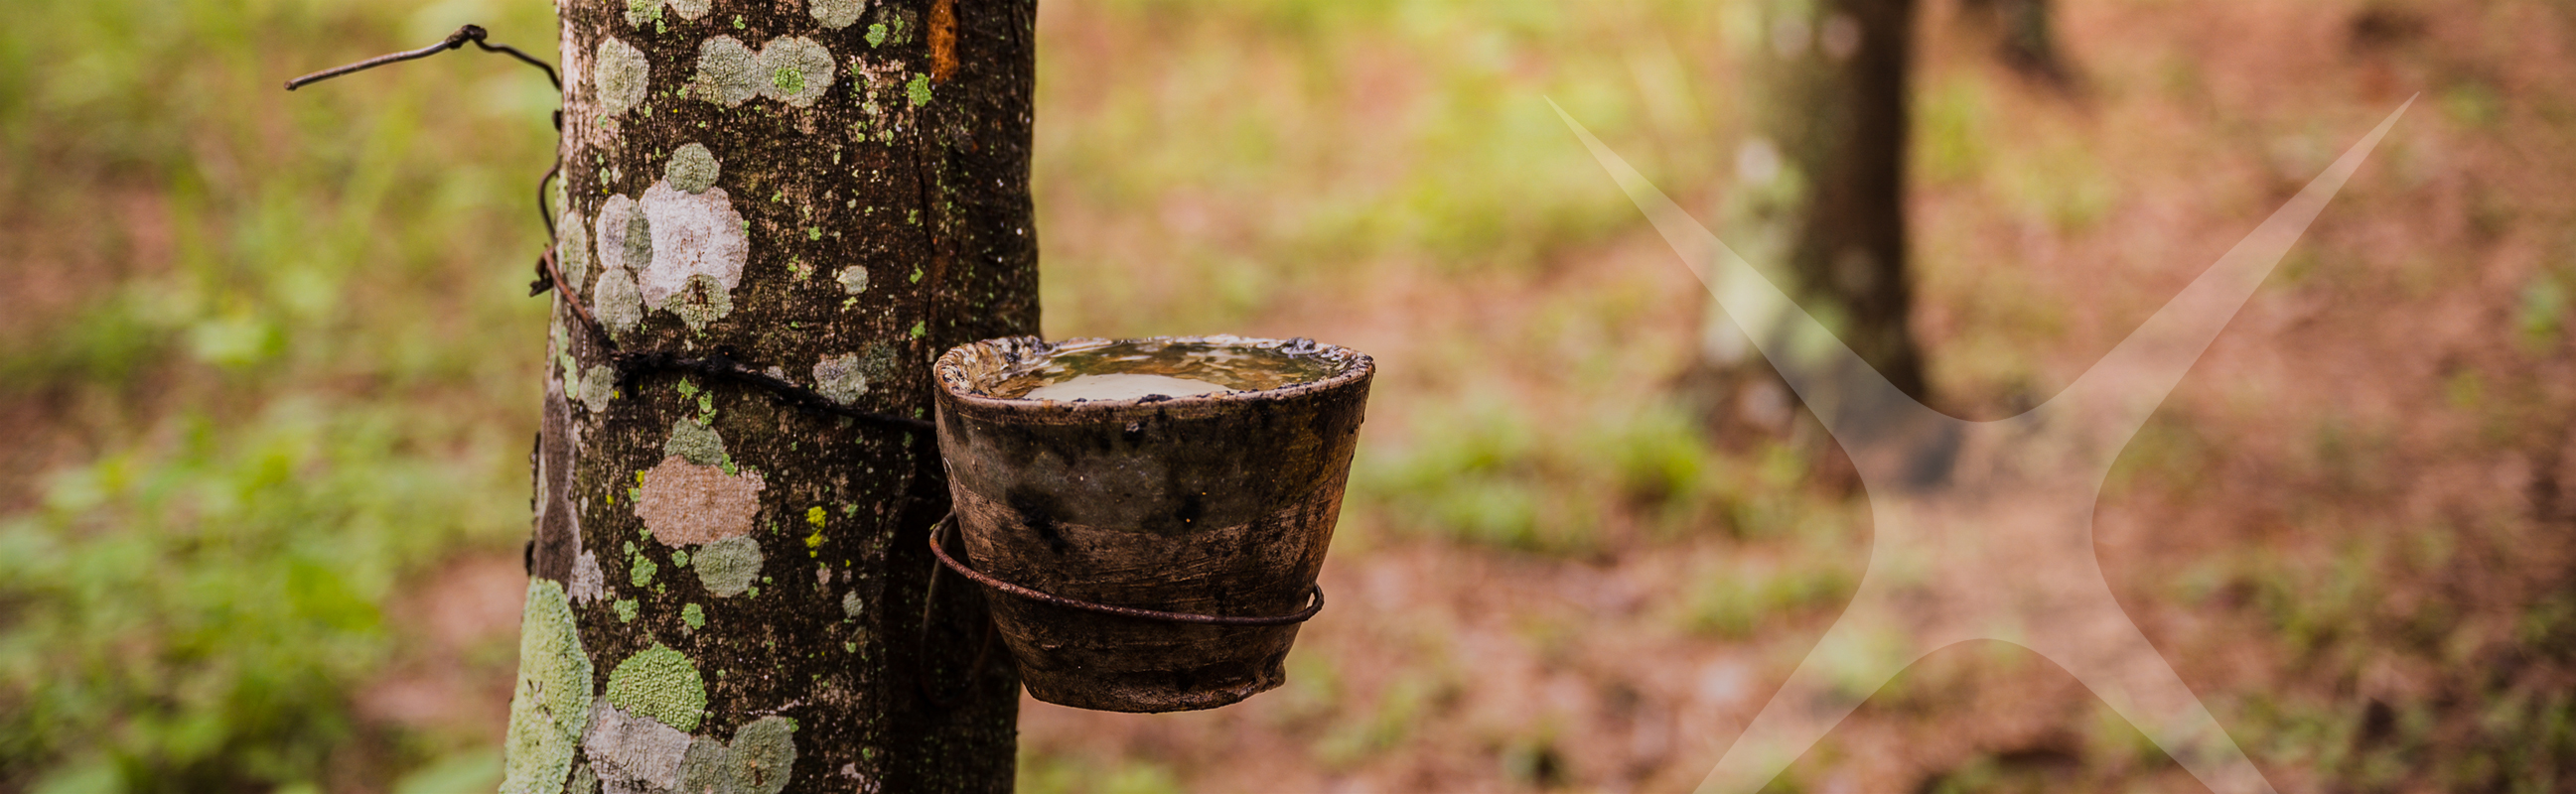 Natural rubber industry digital marketplace